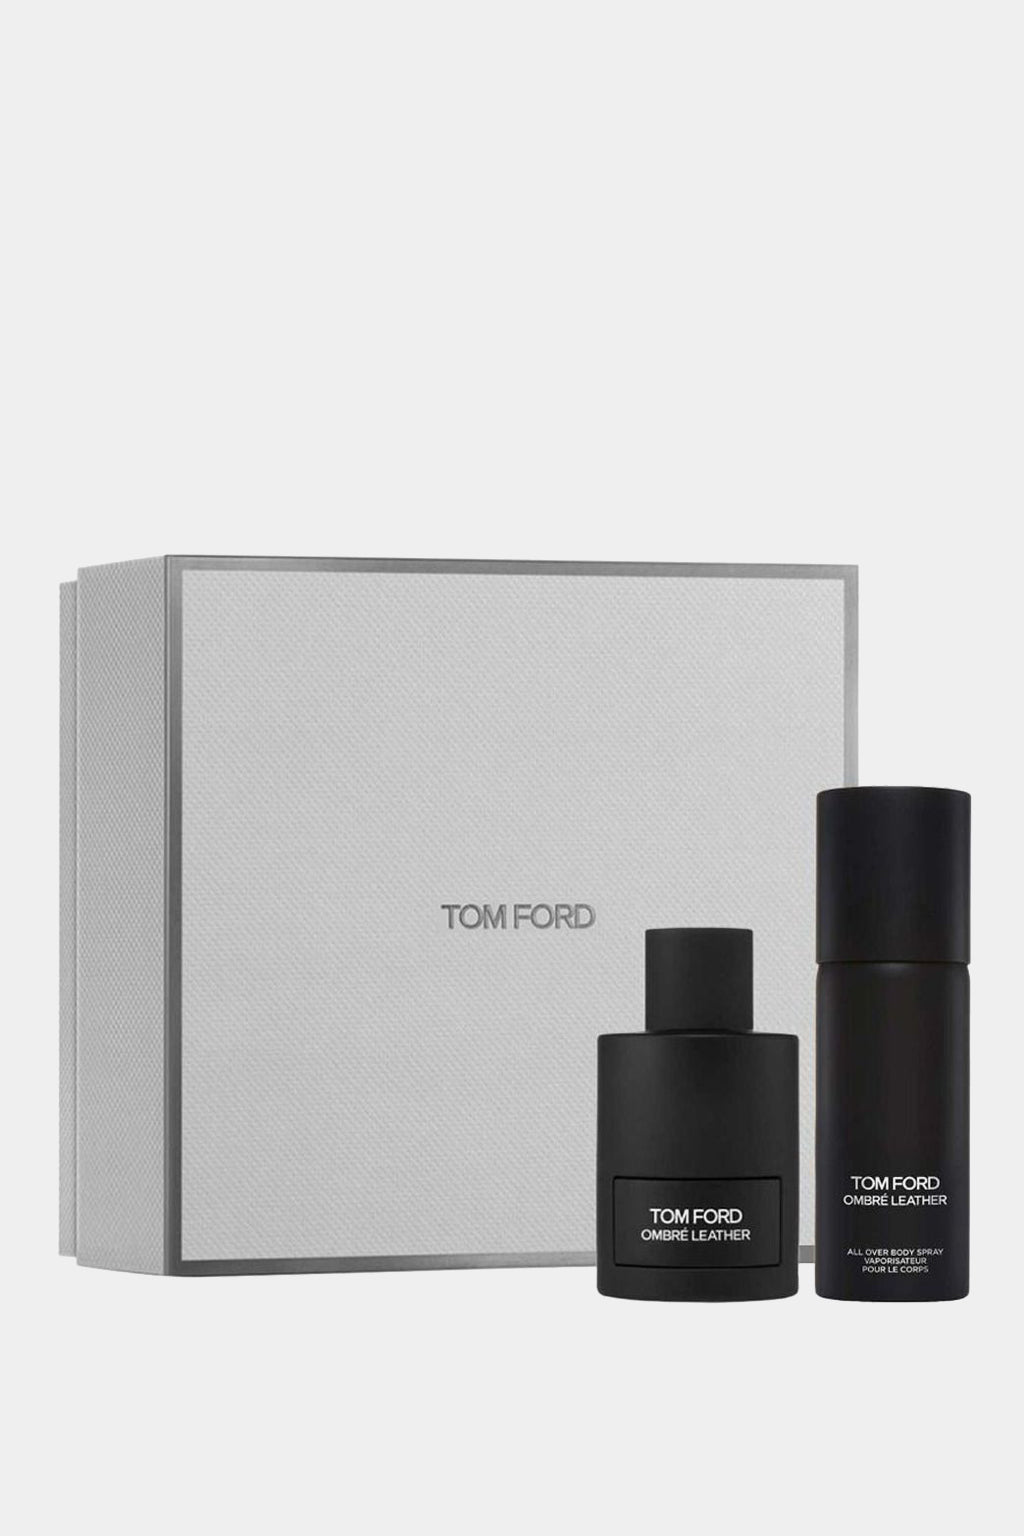 Tom Ford - Ombre Leather Set